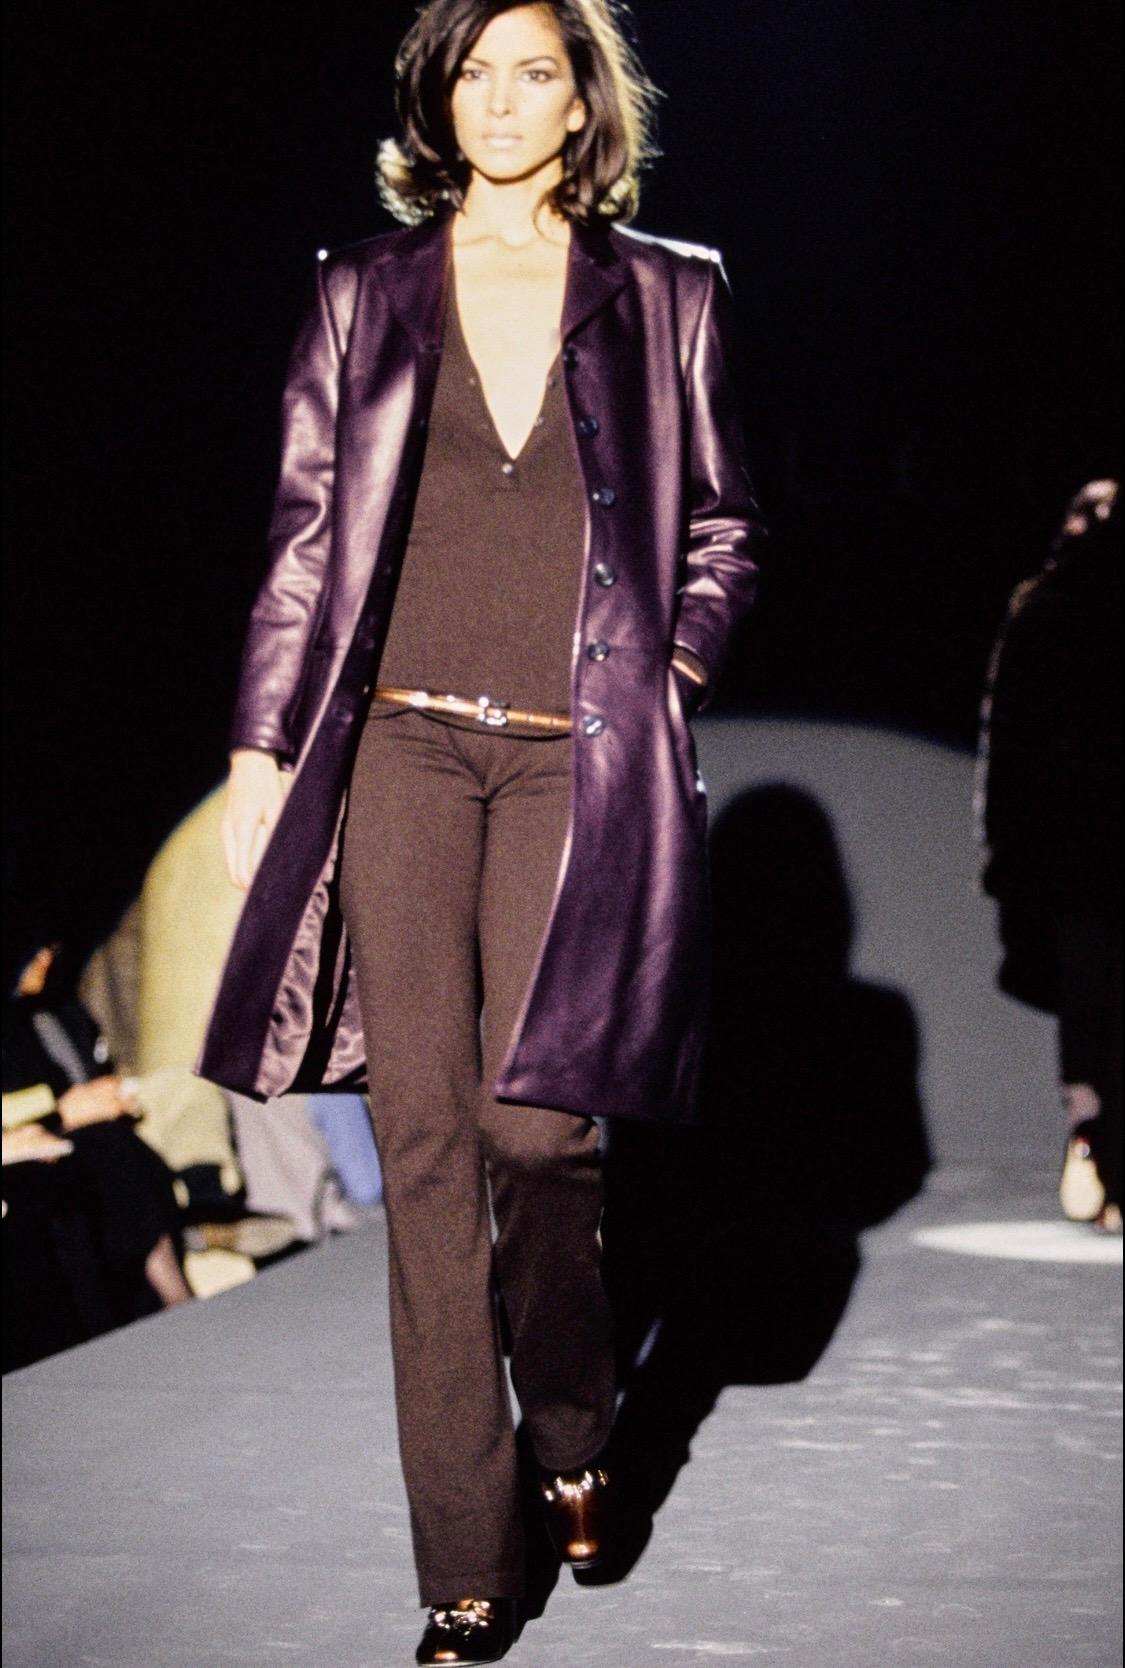 Presenting a stunning purple leather Gucci top, designed by Tom Ford. From the Fall/Winter 1995 collection, other matching purple leather garments debuted on the season's runway on look 40 as an overcoat and on look 41 as pants. This beautifully